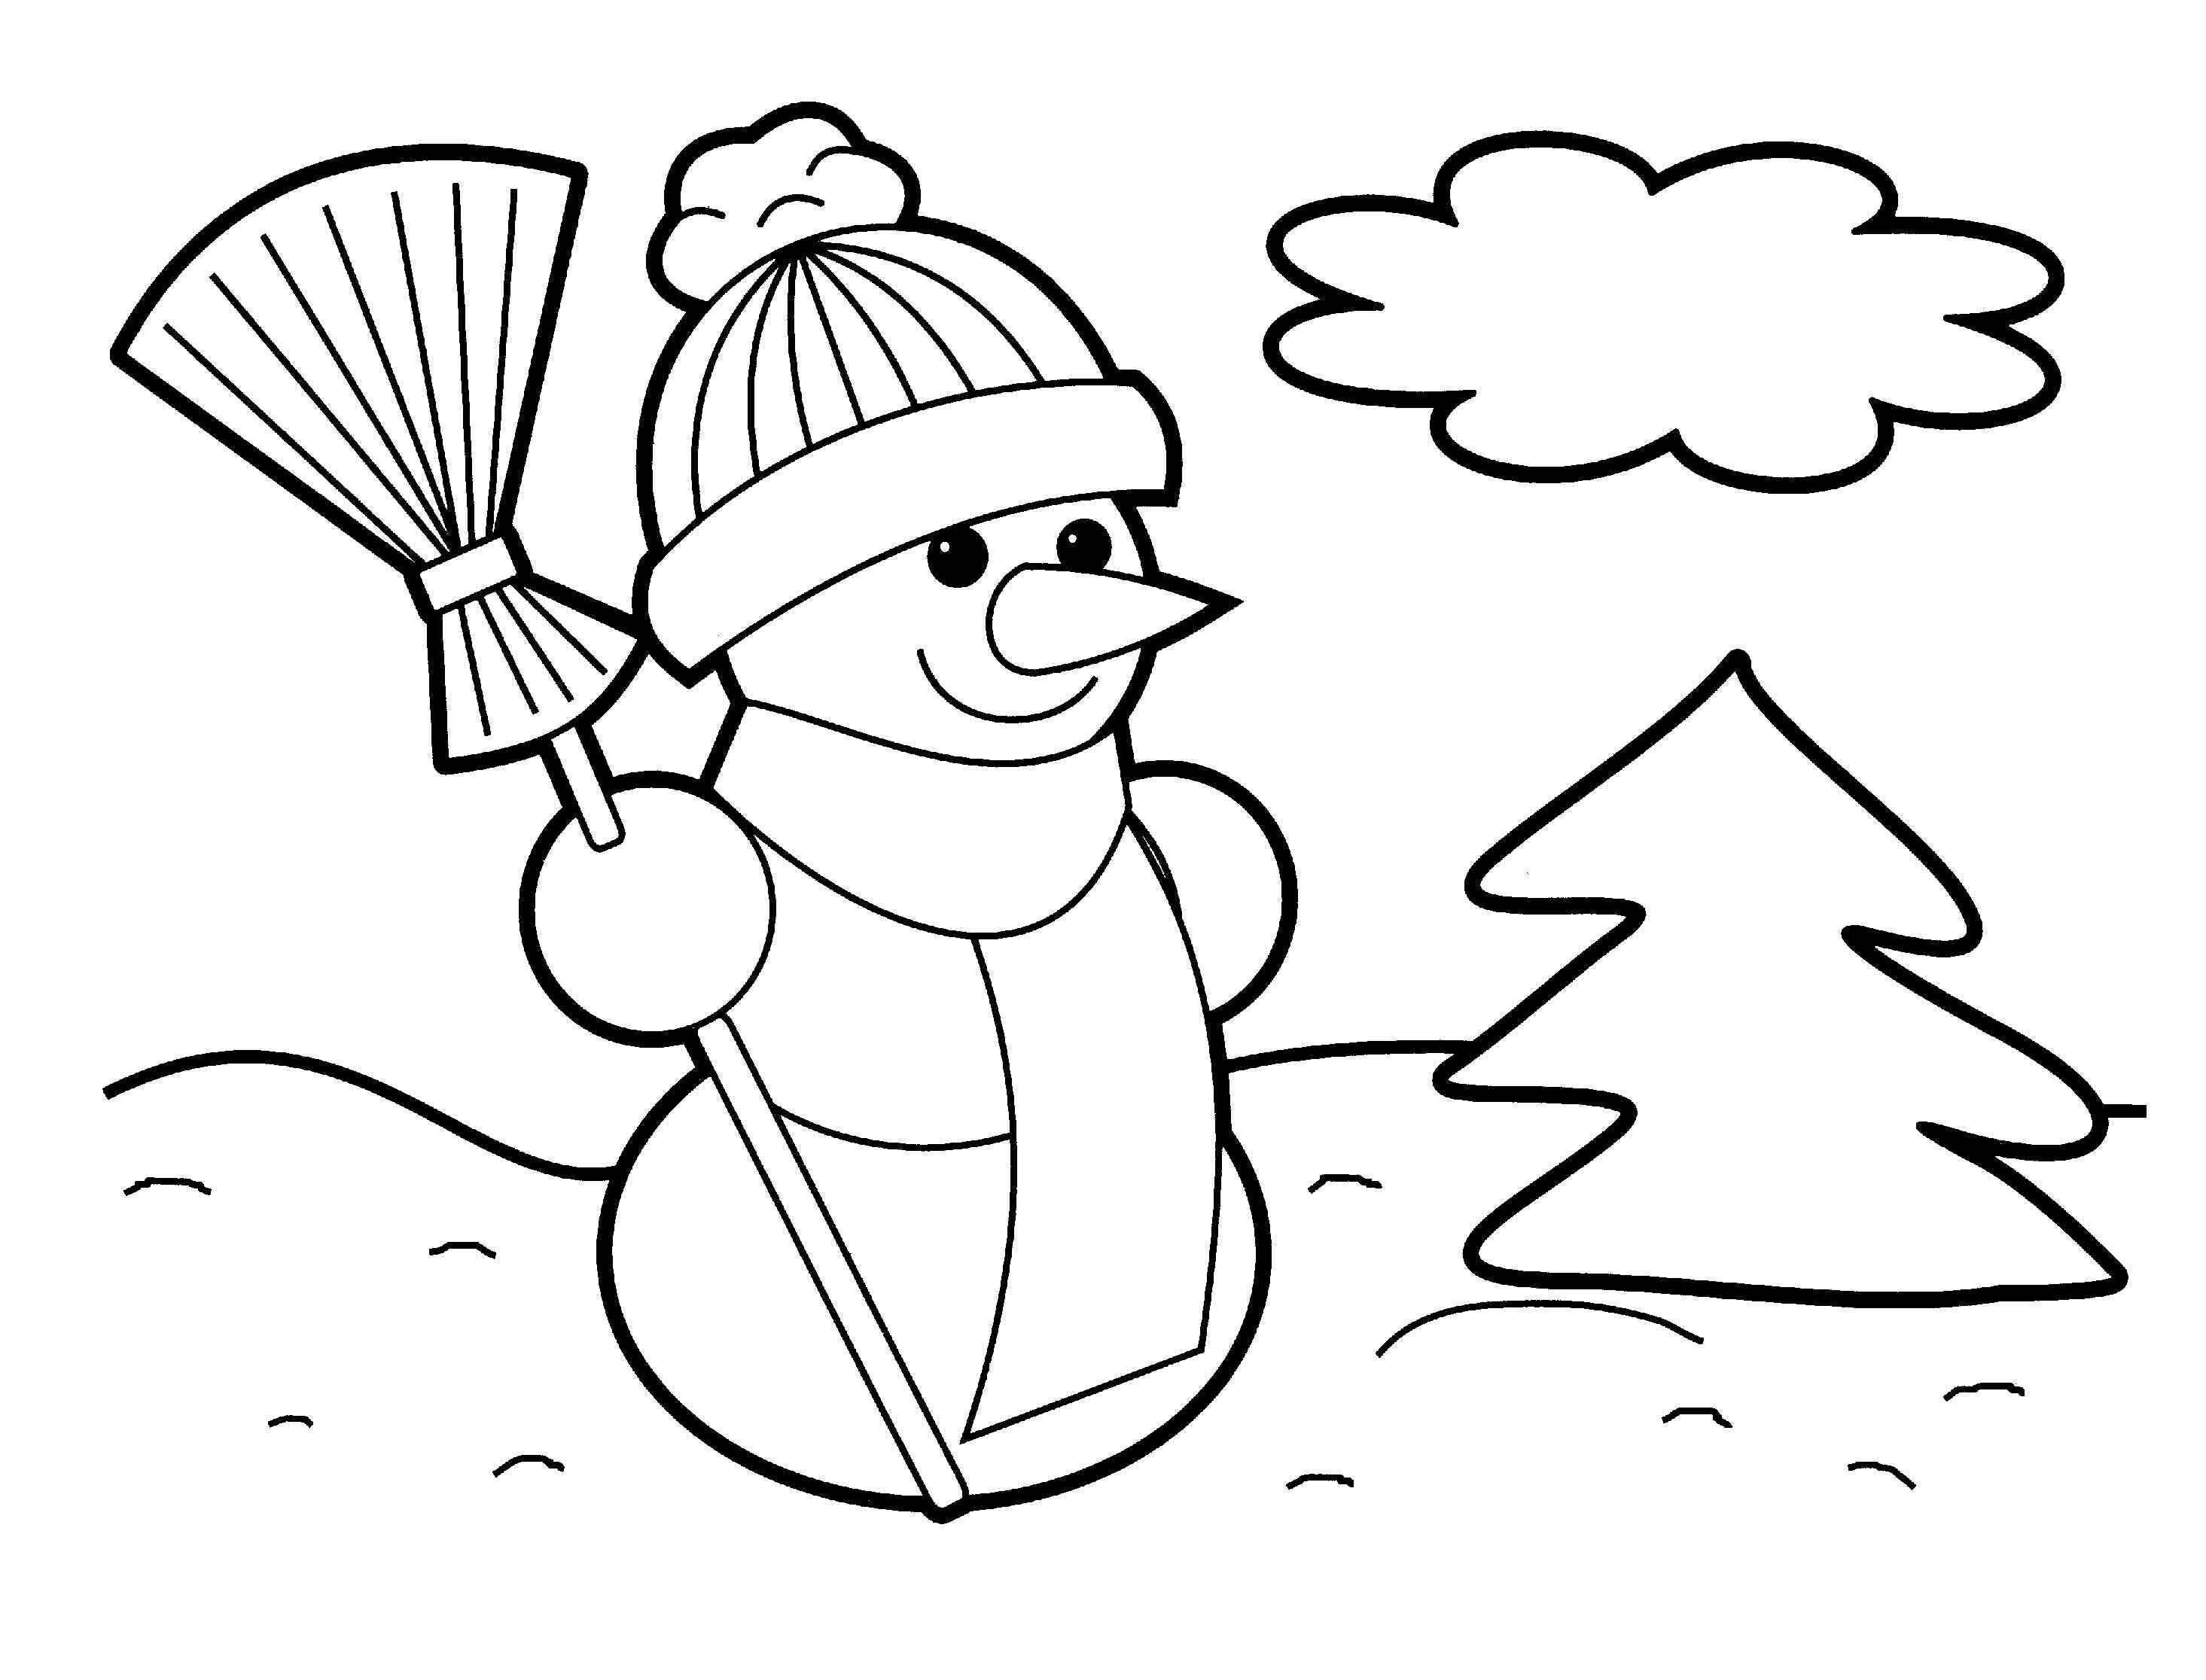 Free Coloring Sheets For Christmas To Print
 Free Christmas Coloring Pages To Print – Wallpapers9